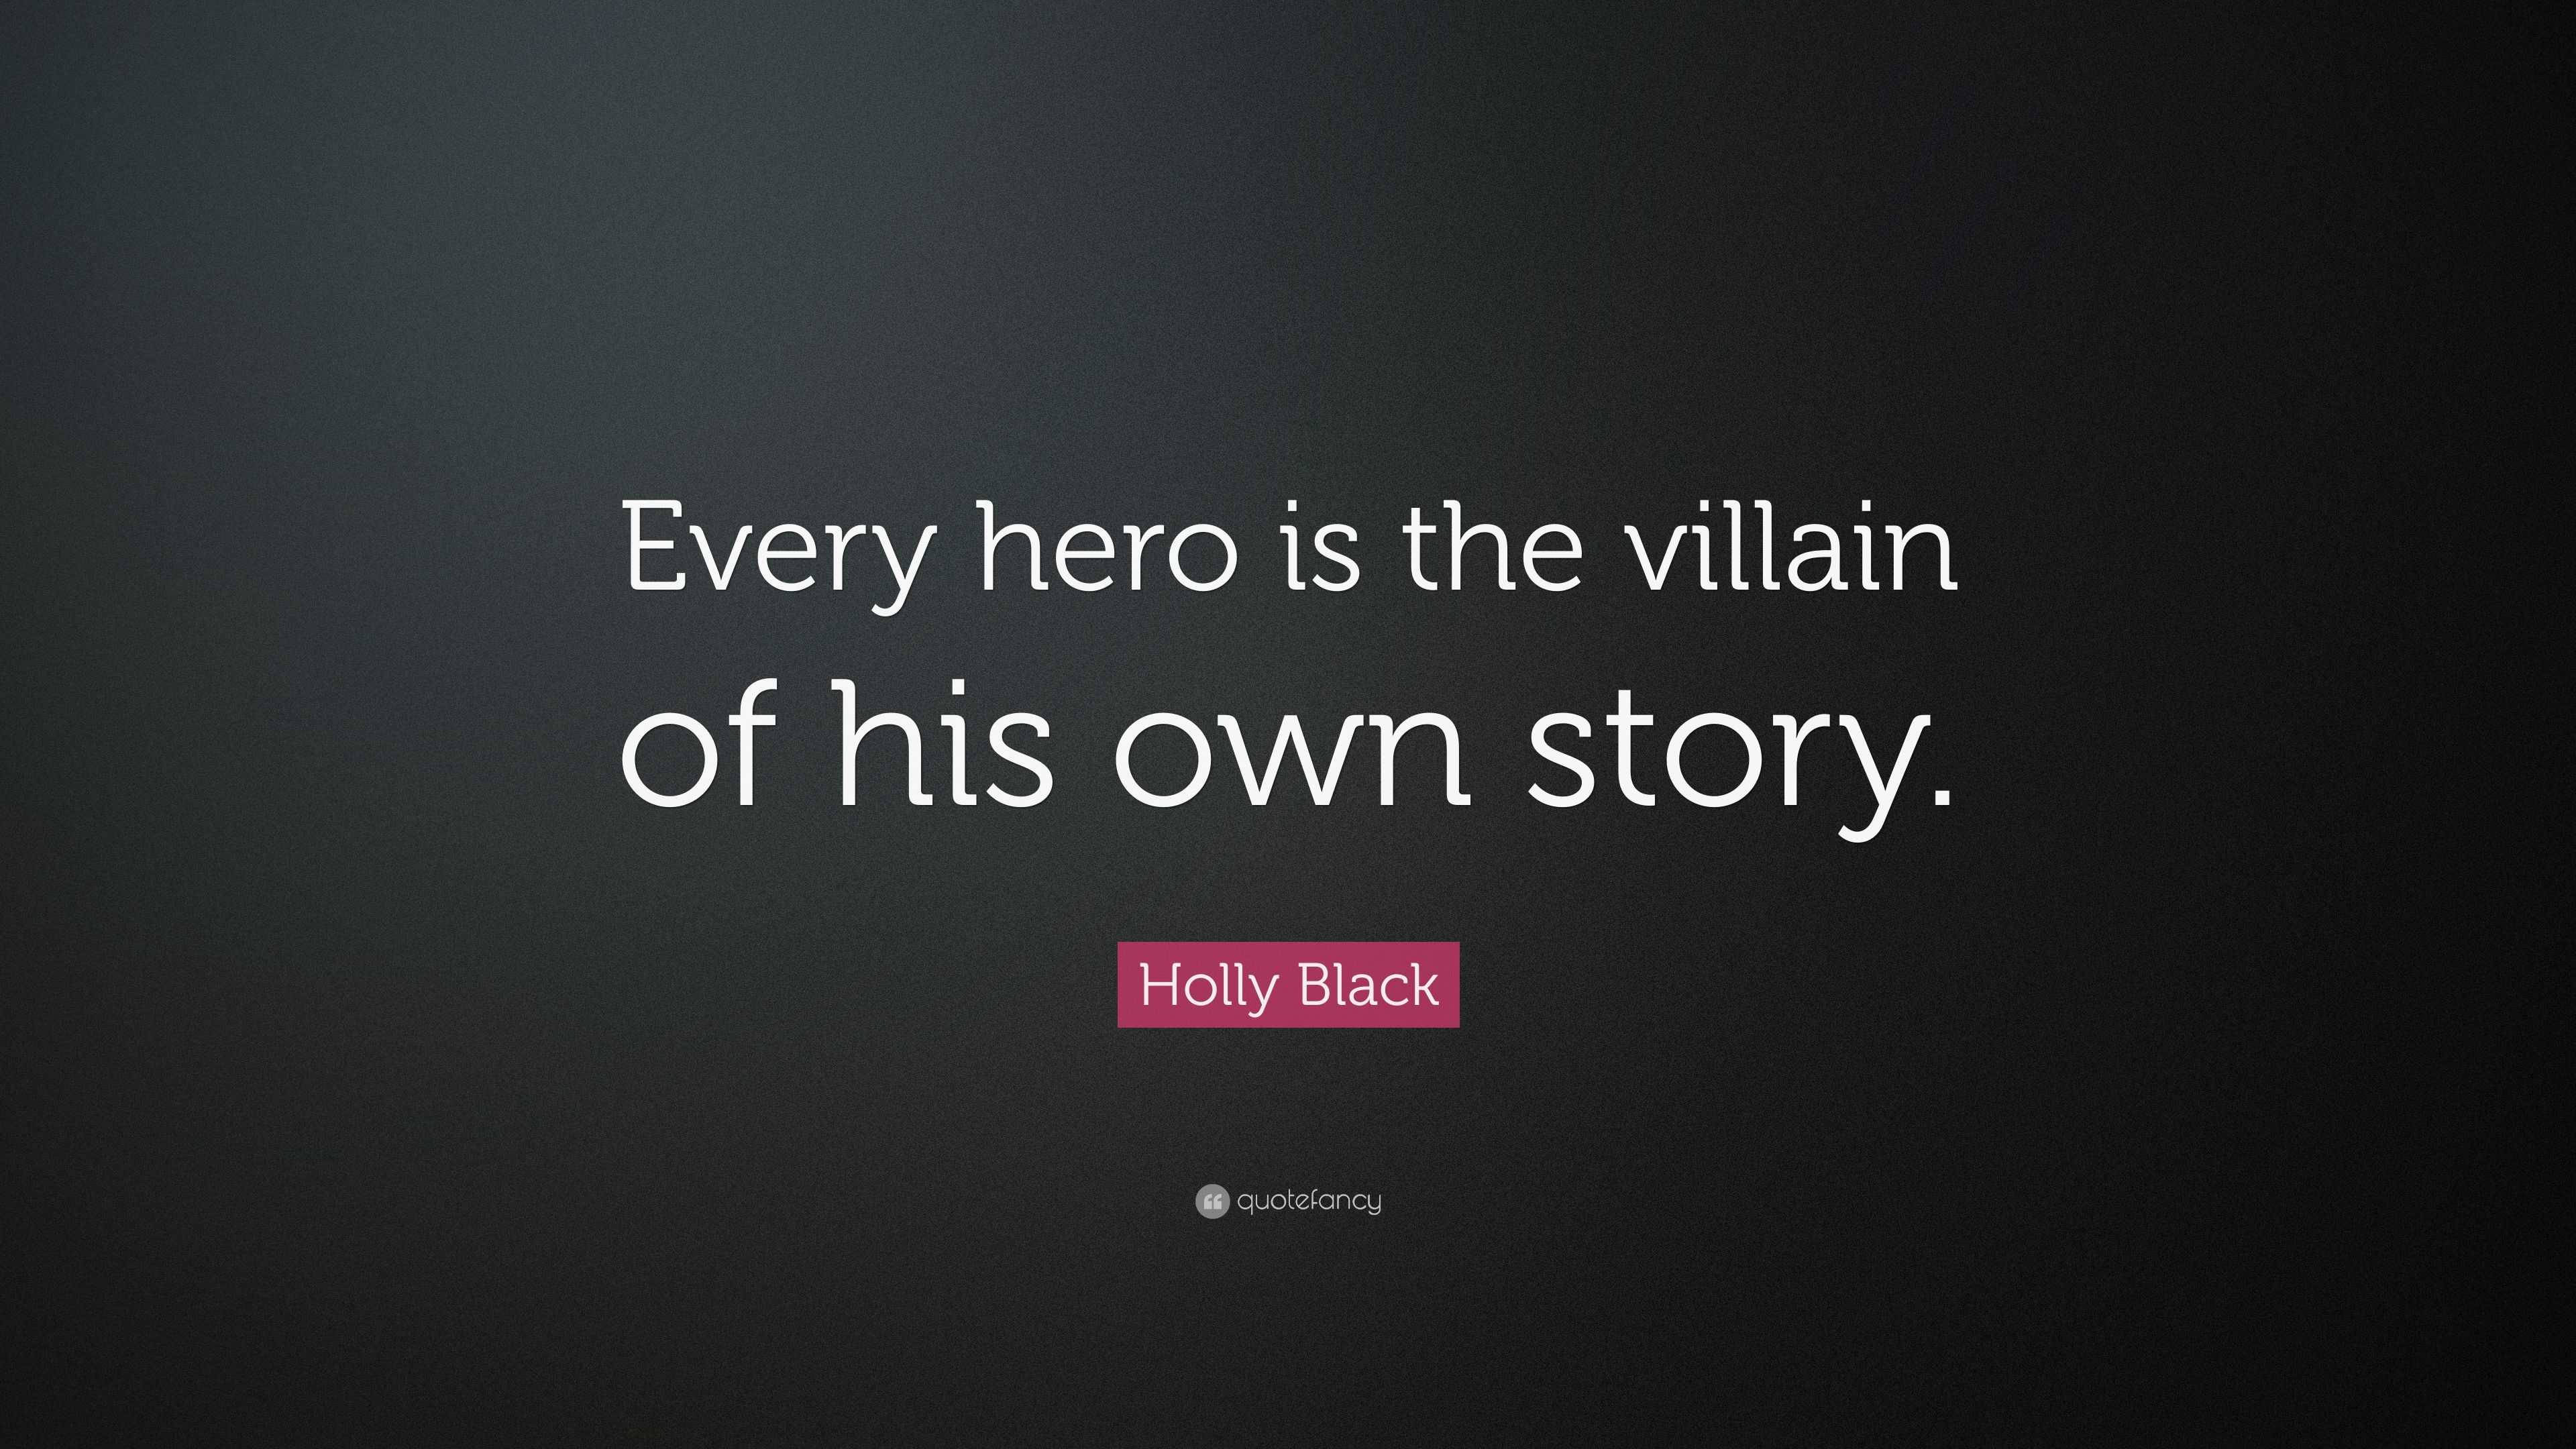 Holly Black Quote: “Every hero is the villain of his own story.”